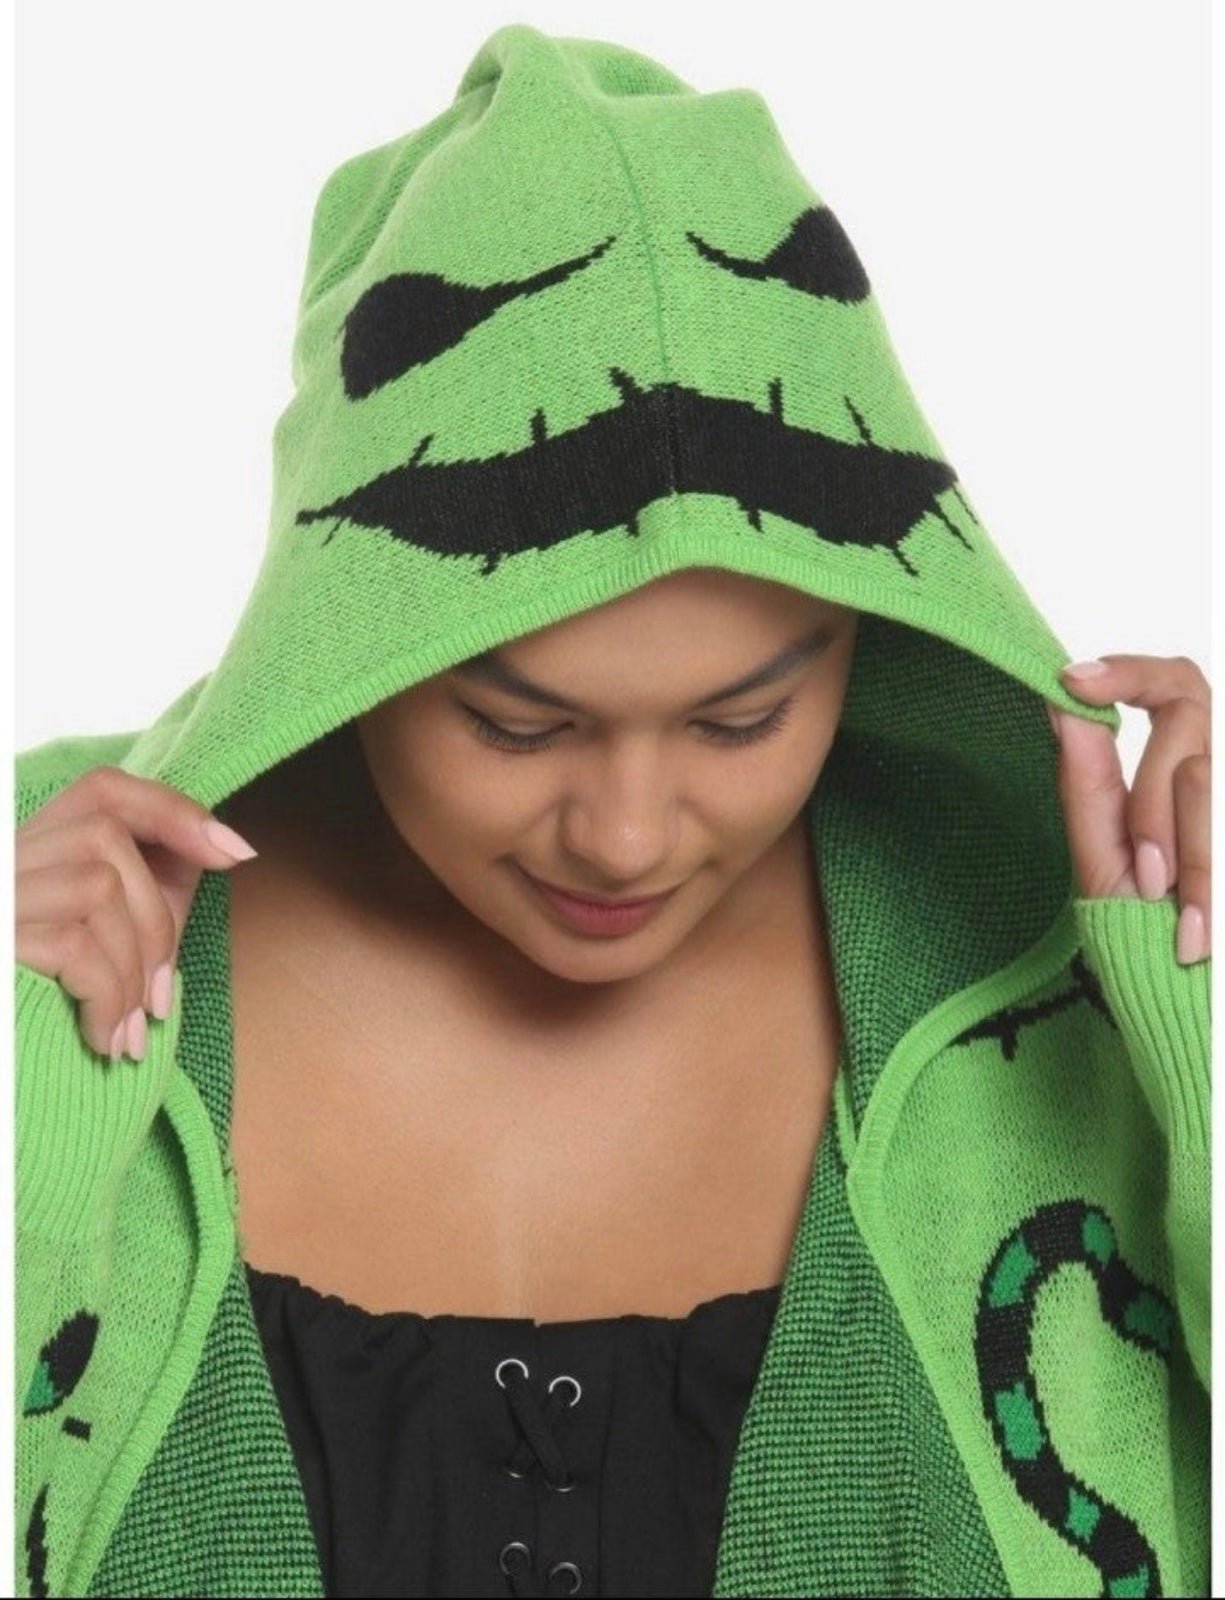 high discount Oogie Boogie Hot Topic Nightmare Before Christmas Cardigan Size Medium KZytnOW1l well sale